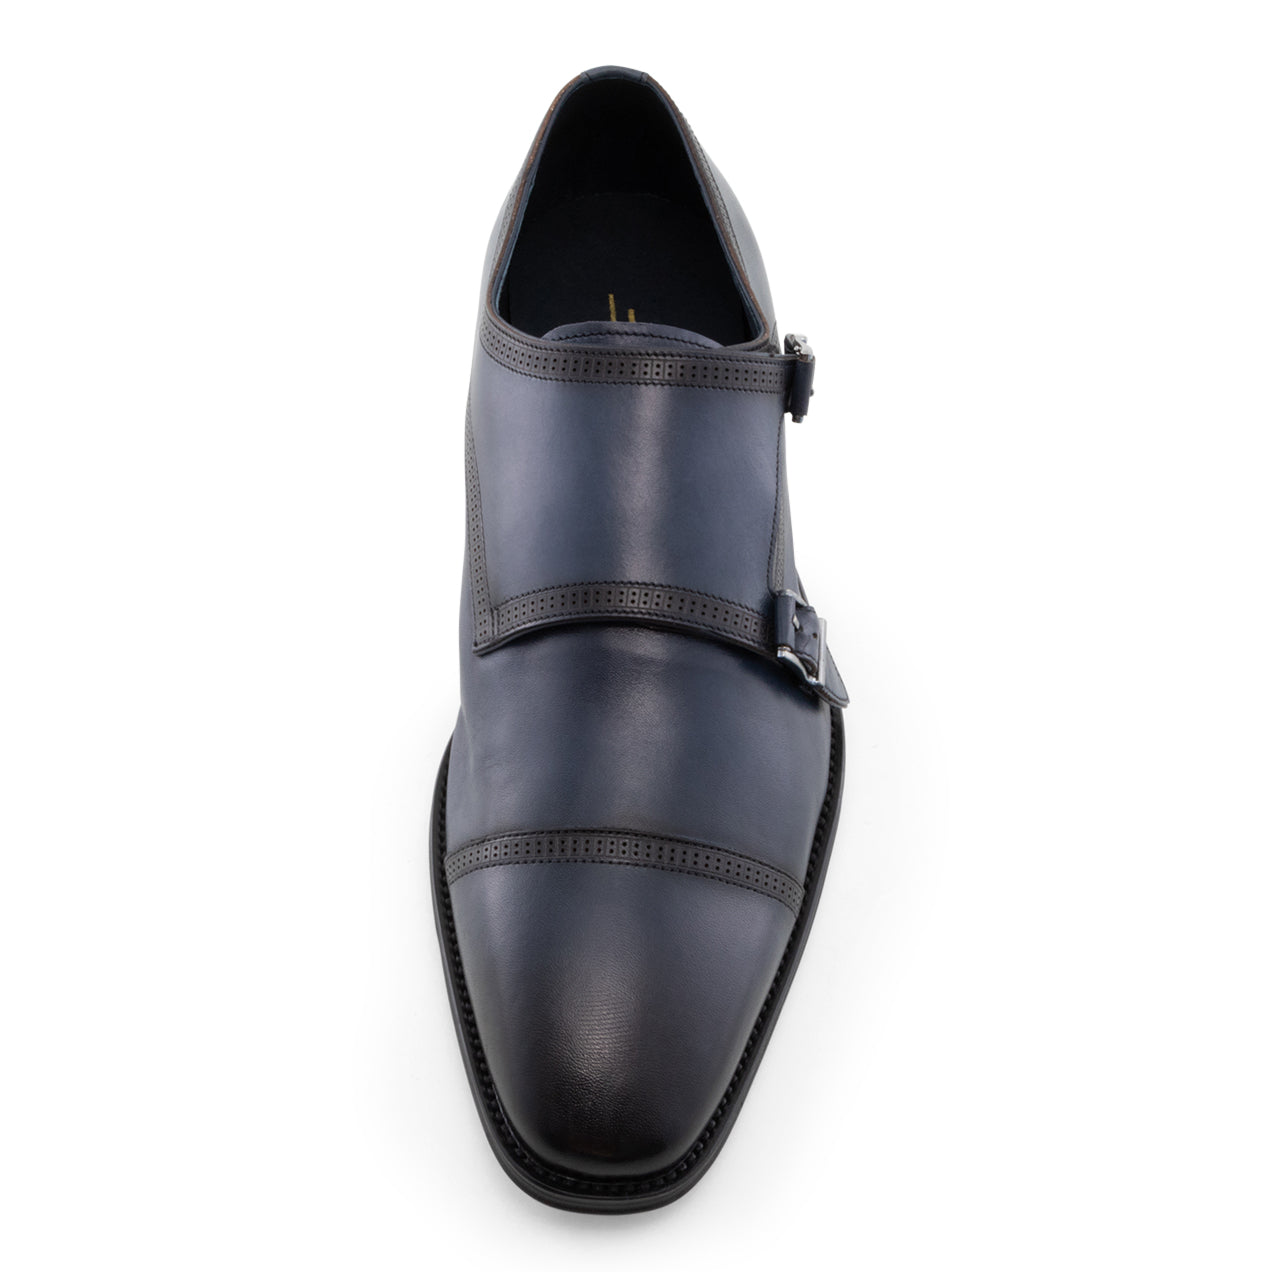 Mccain - Navy Double Monk Straps Oxford Dress Shoes for Men by Jump 6